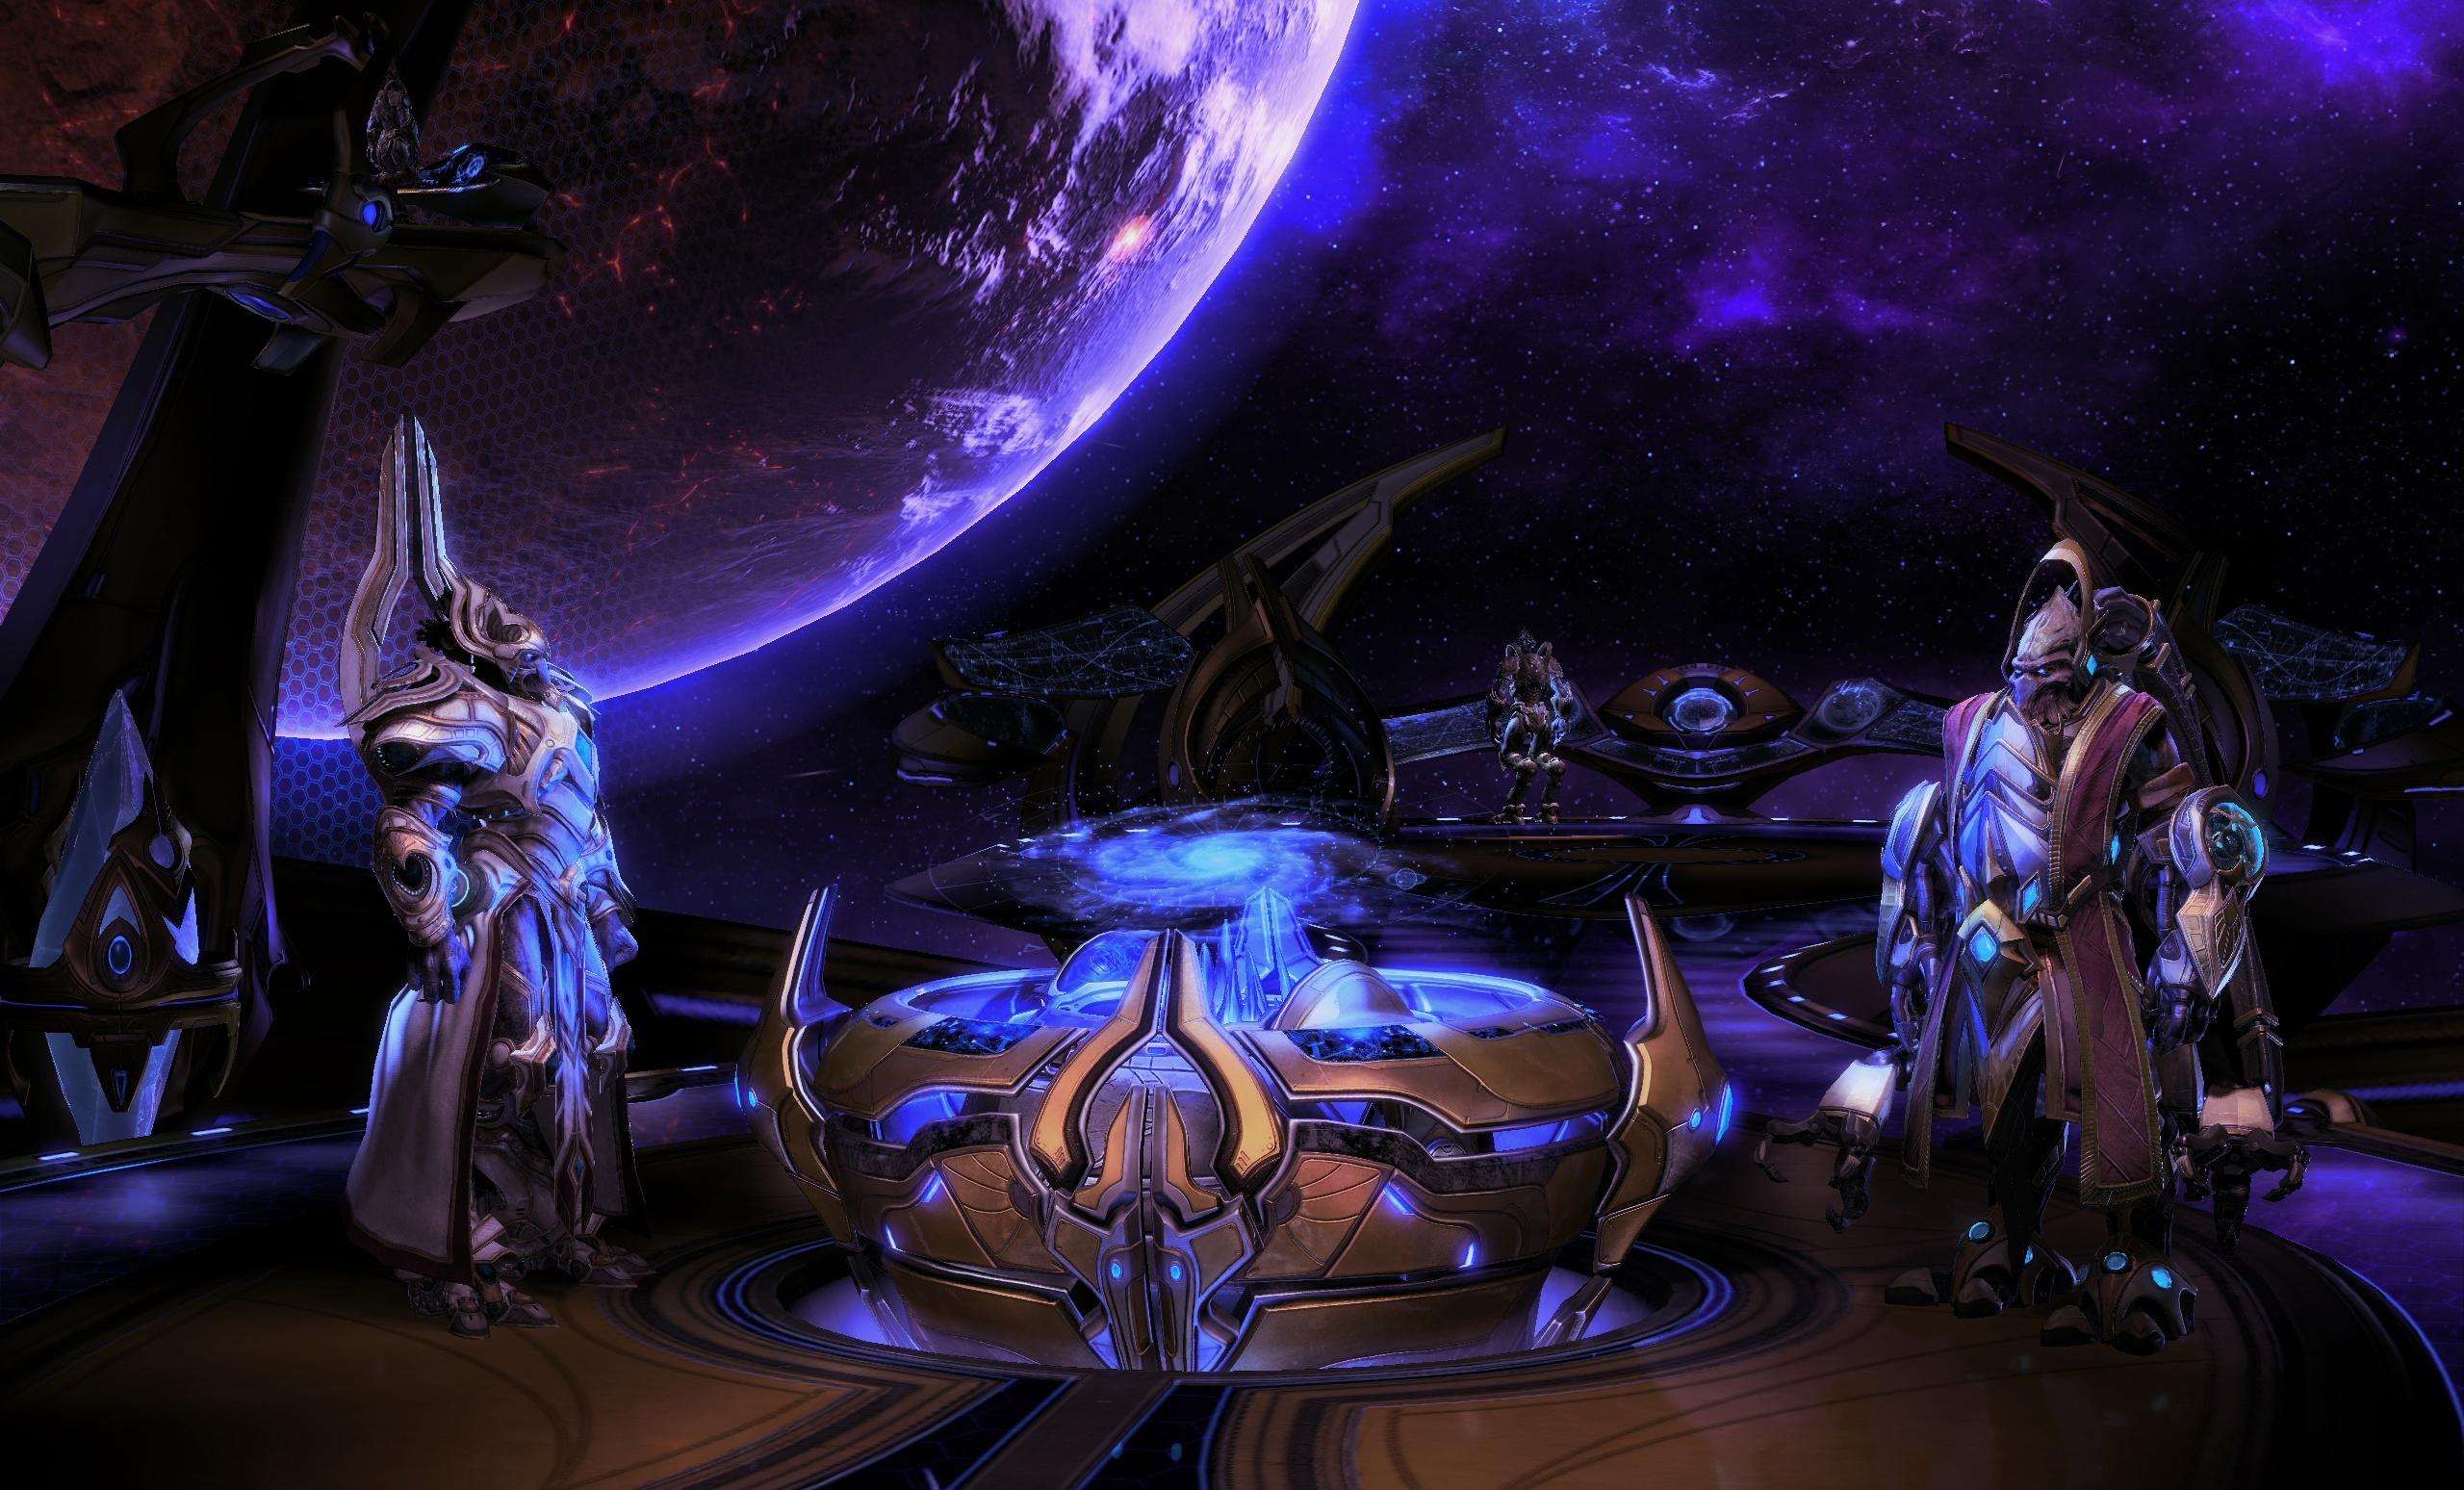 Starcraft II: Legacy of the Void officially revealed at Blizzcon.